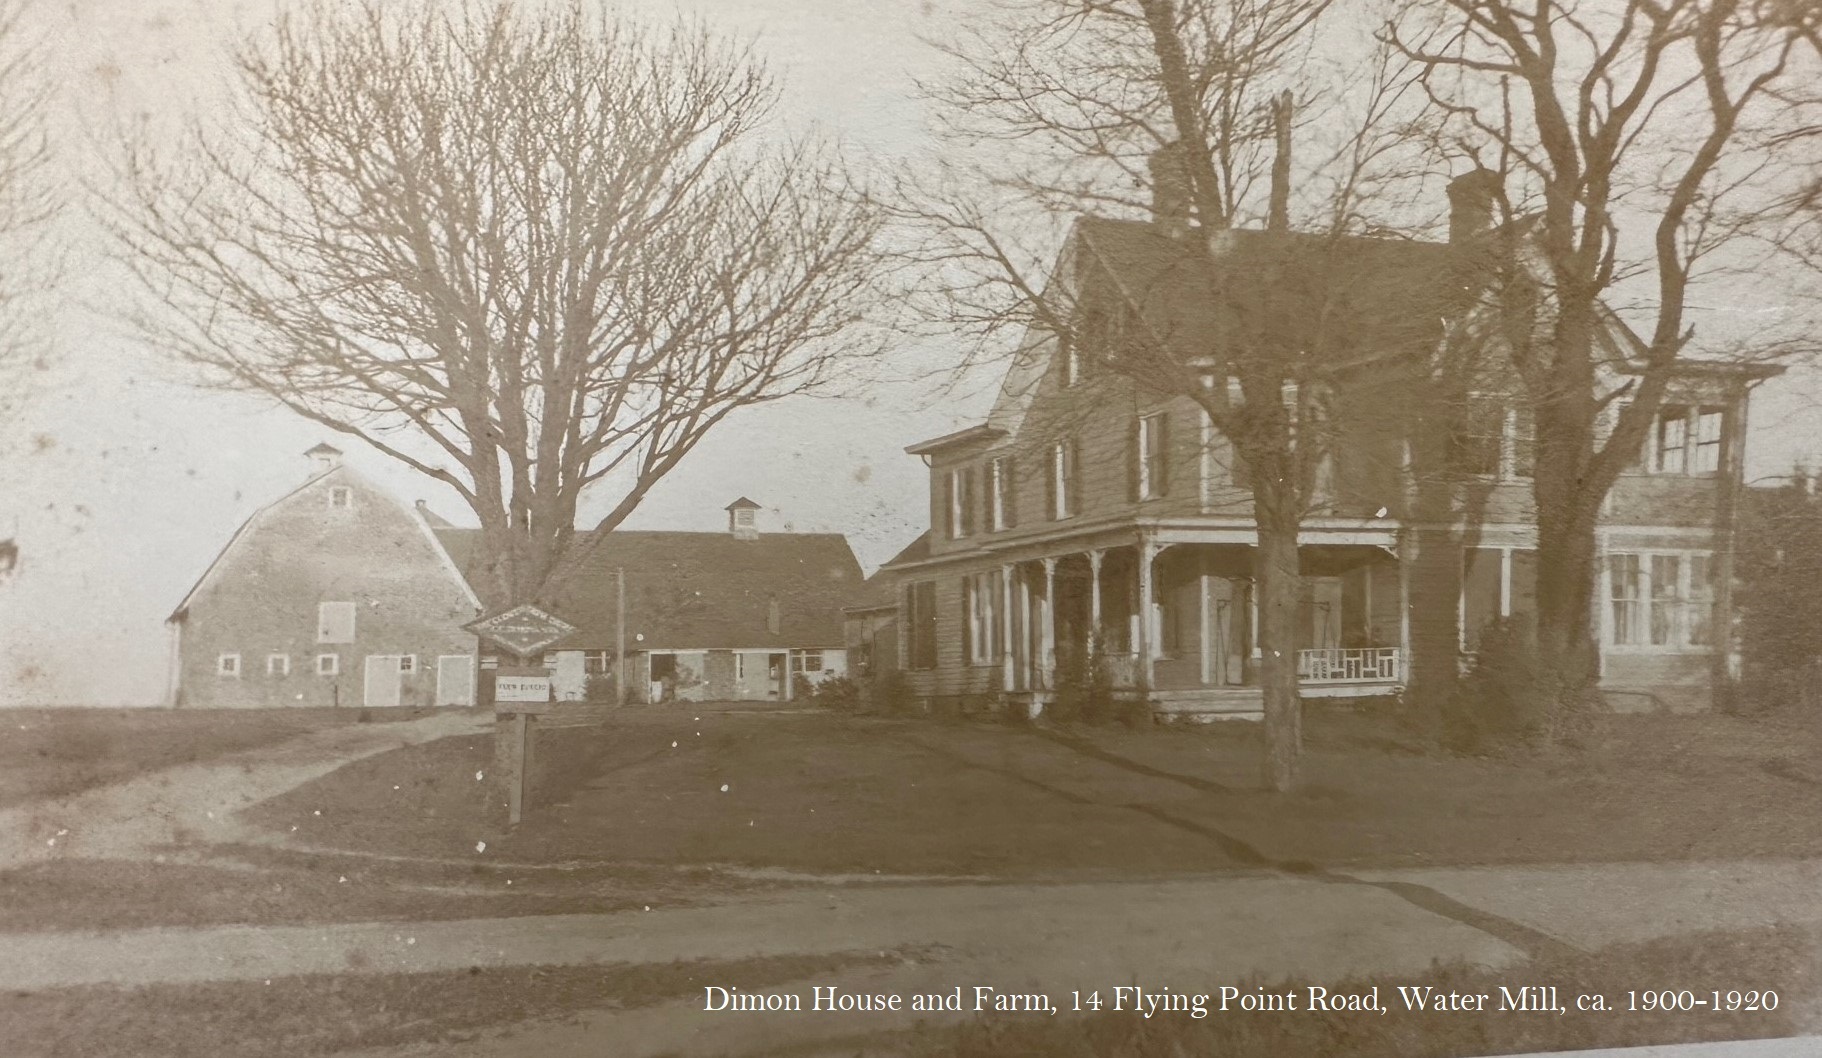 The Dimon Farm on Flying Point Road in Water Mill, circa 1900 to 1920.   COURTESY CHRIS DIMON AND THE DIMON FAMILY